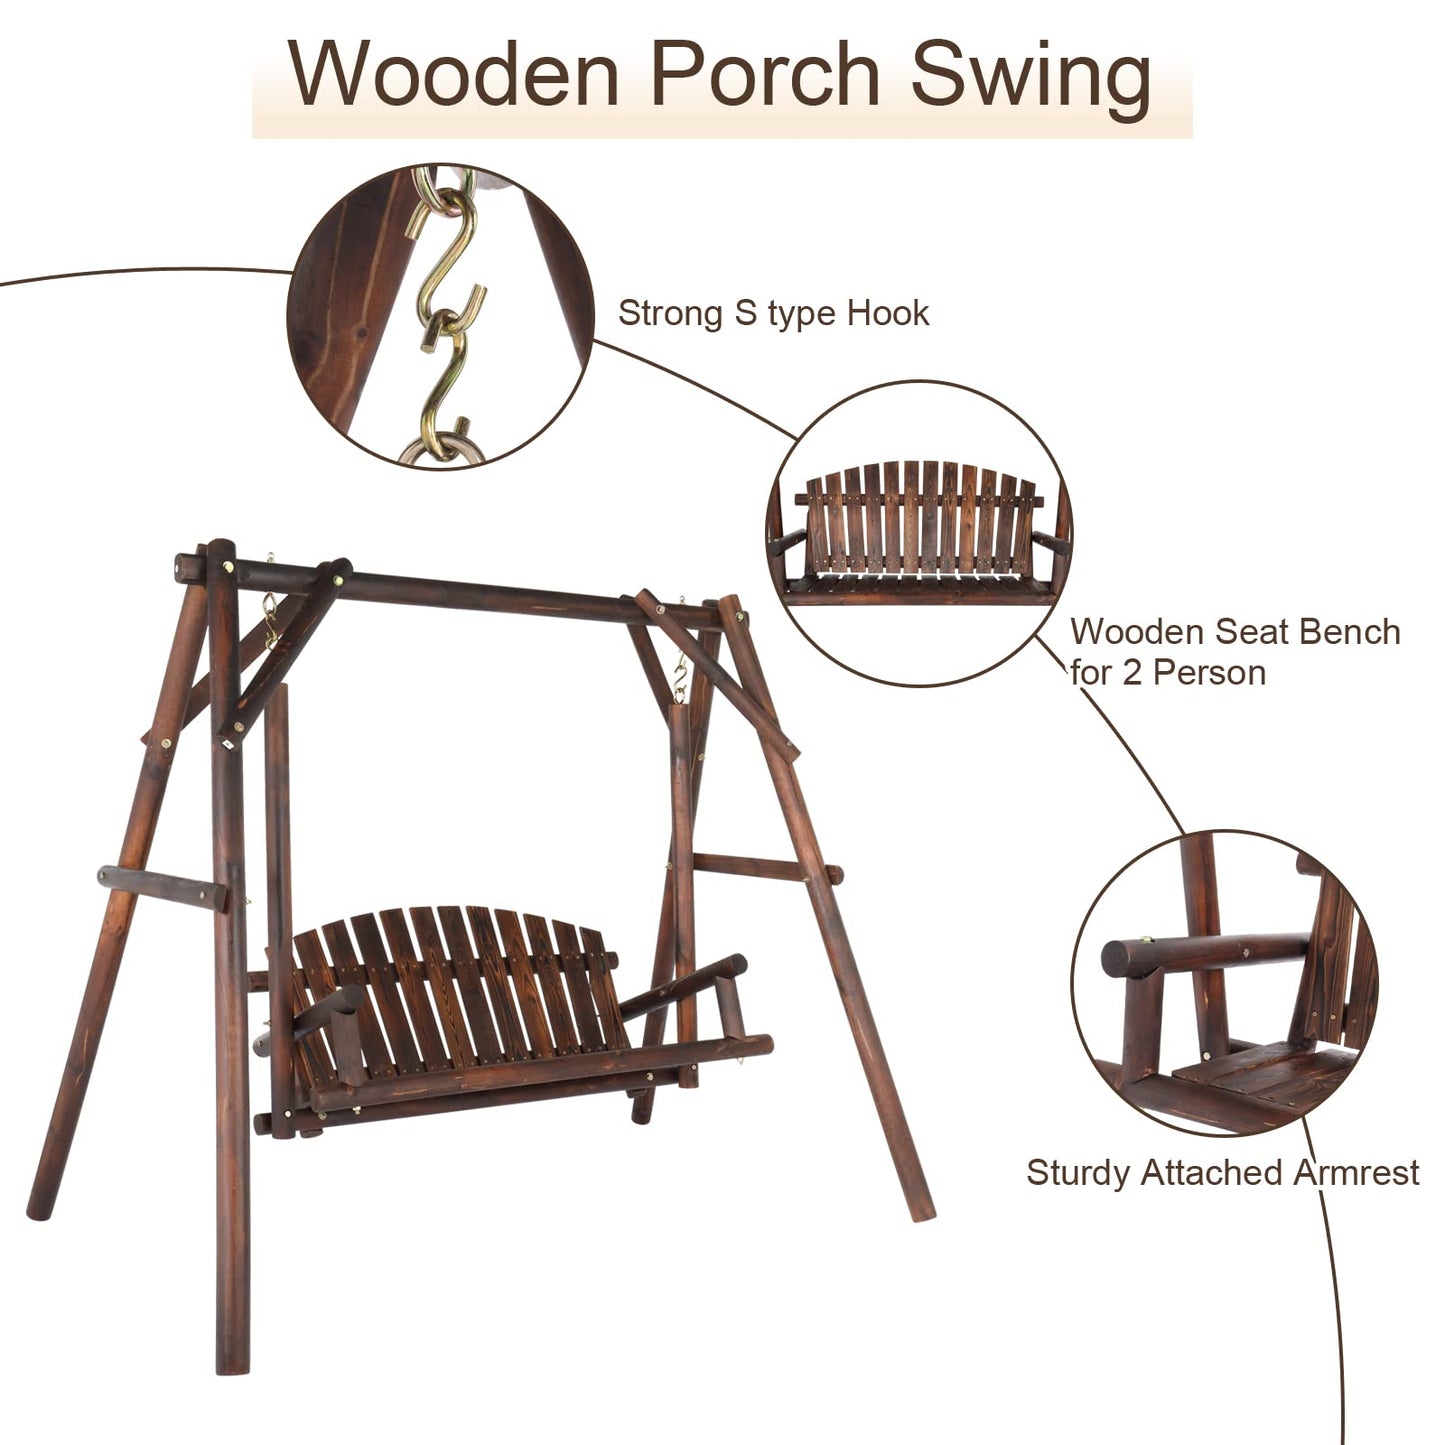 Outvita Patio Porch Swing Set, 67in Wood Log Swing Stand with Bench Loveseat Stable A-Frame for Patio Backyard Deck (Carbonized)